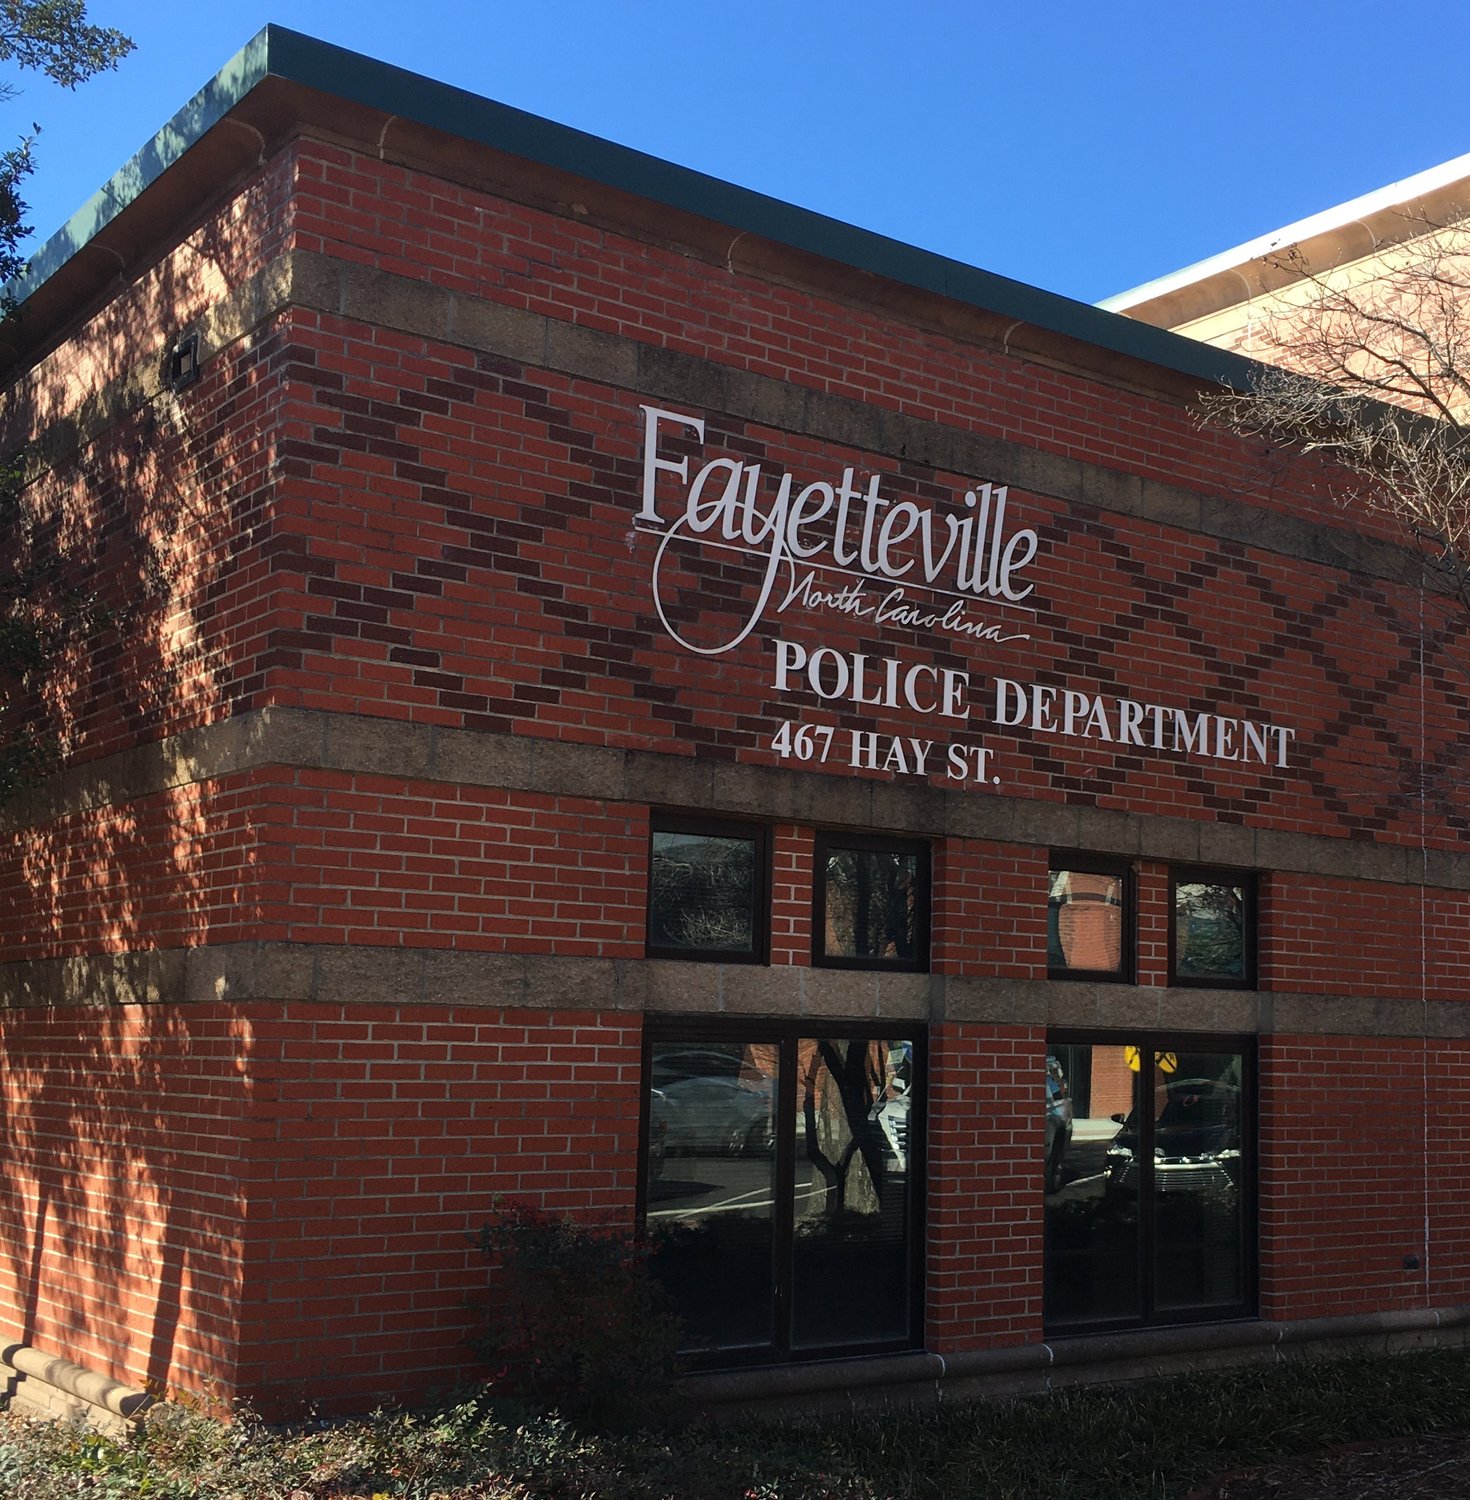 The Fayetteville Police Department will use ShotSpotter's gunshot detection technology in hopes of responding more quickly to incidents of gun violence within the city. It's the latest North Carolina city to use the technology, which has had mixed results elsewhere in the state.